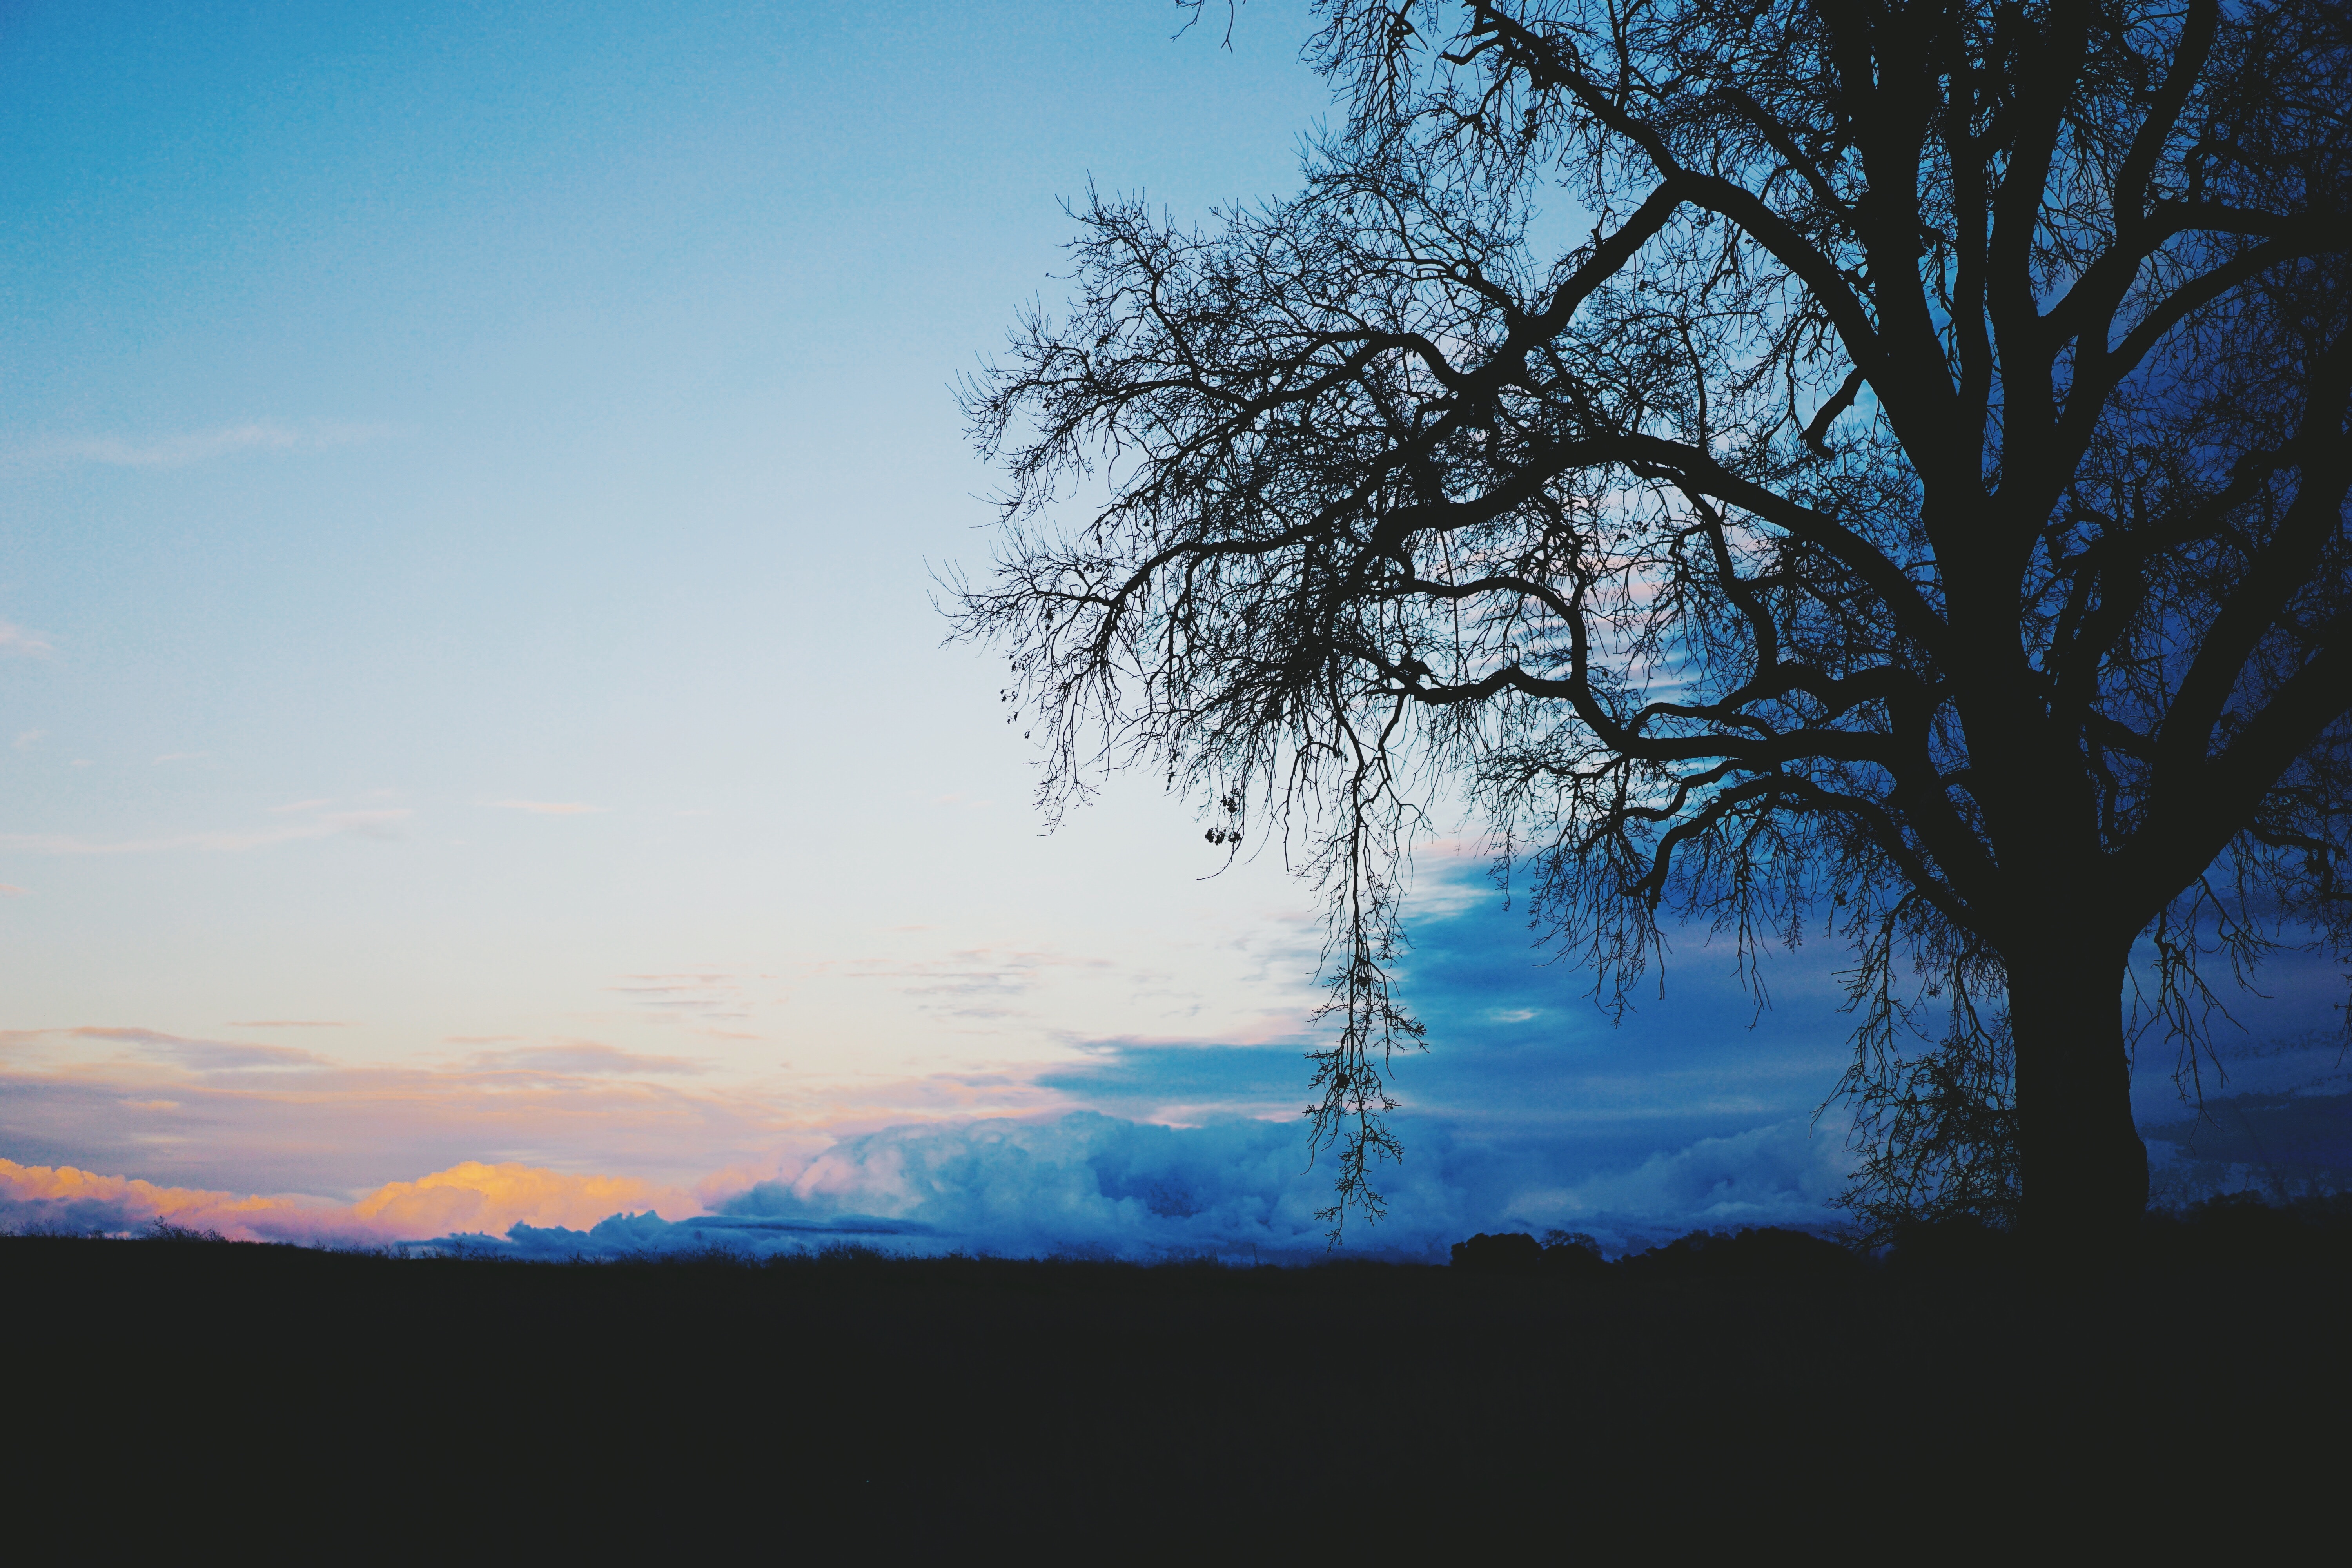 130493 download wallpaper nature, twilight, clouds, dark, wood, tree, dusk, evening screensavers and pictures for free